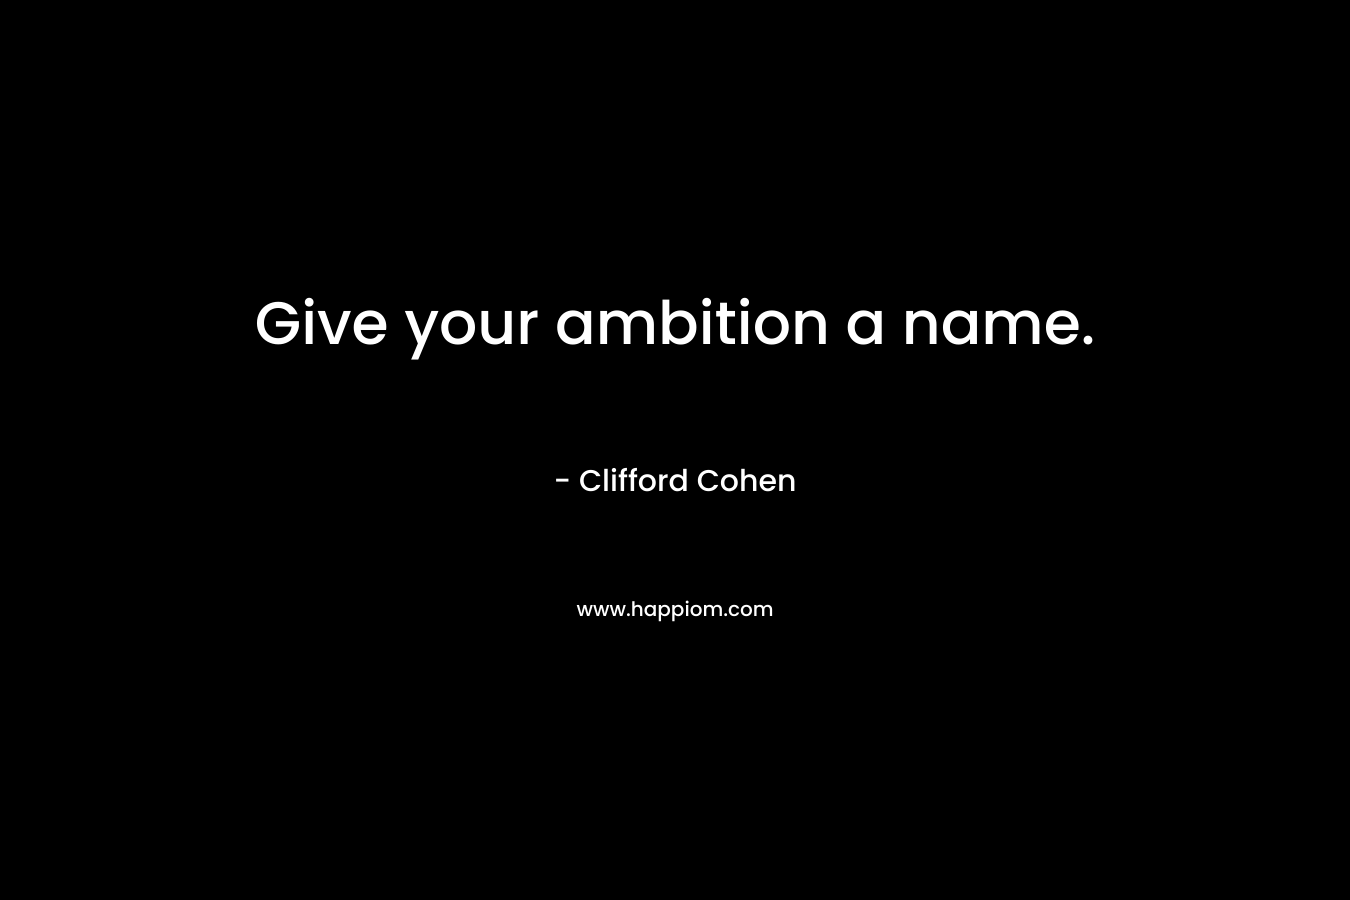 Give your ambition a name.